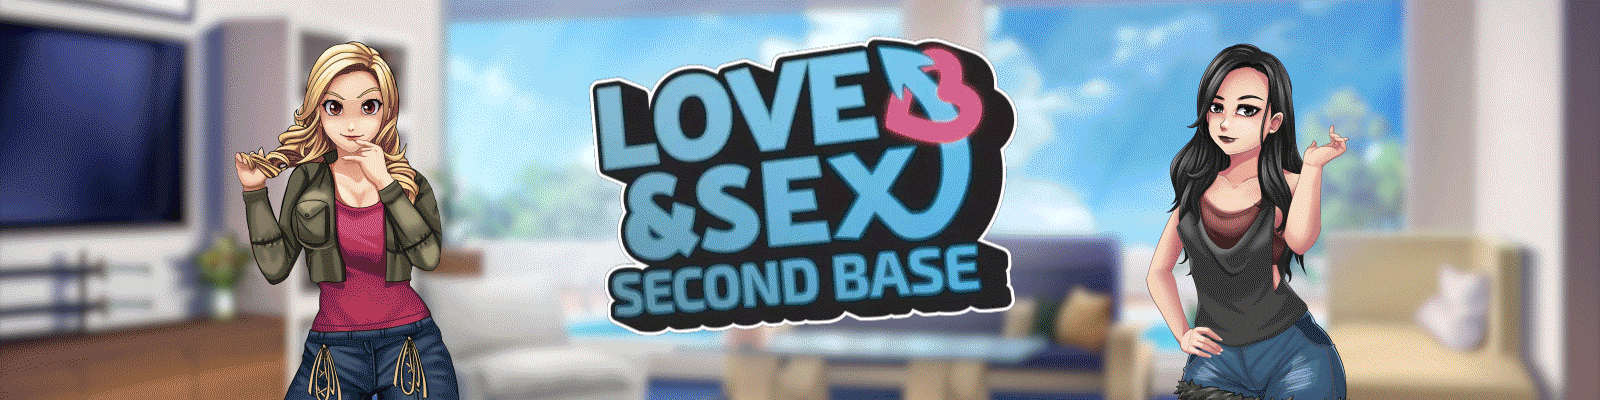 Love and sex second base game banner